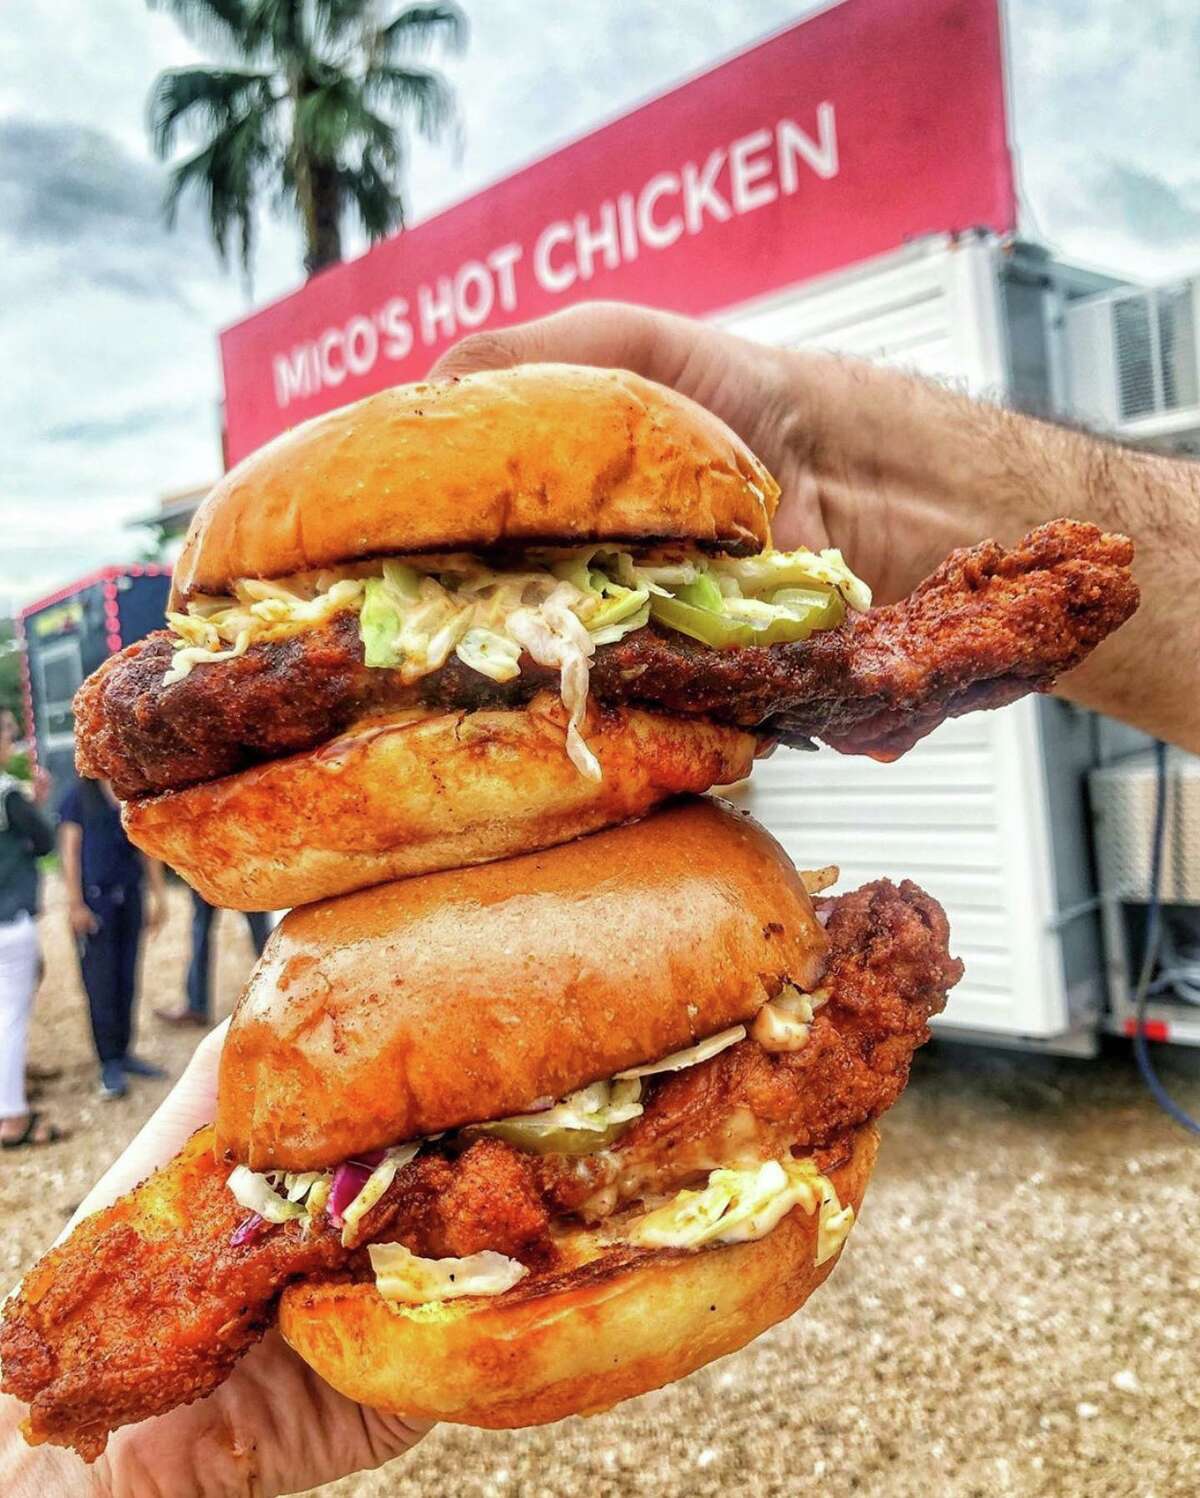 The HeightsMico’s Hot Chicken, a Nashville-based hot chicken restaurant, will open a brick-and-mortar at 1603 N. Durham Dr. in the Heights in early 2020.